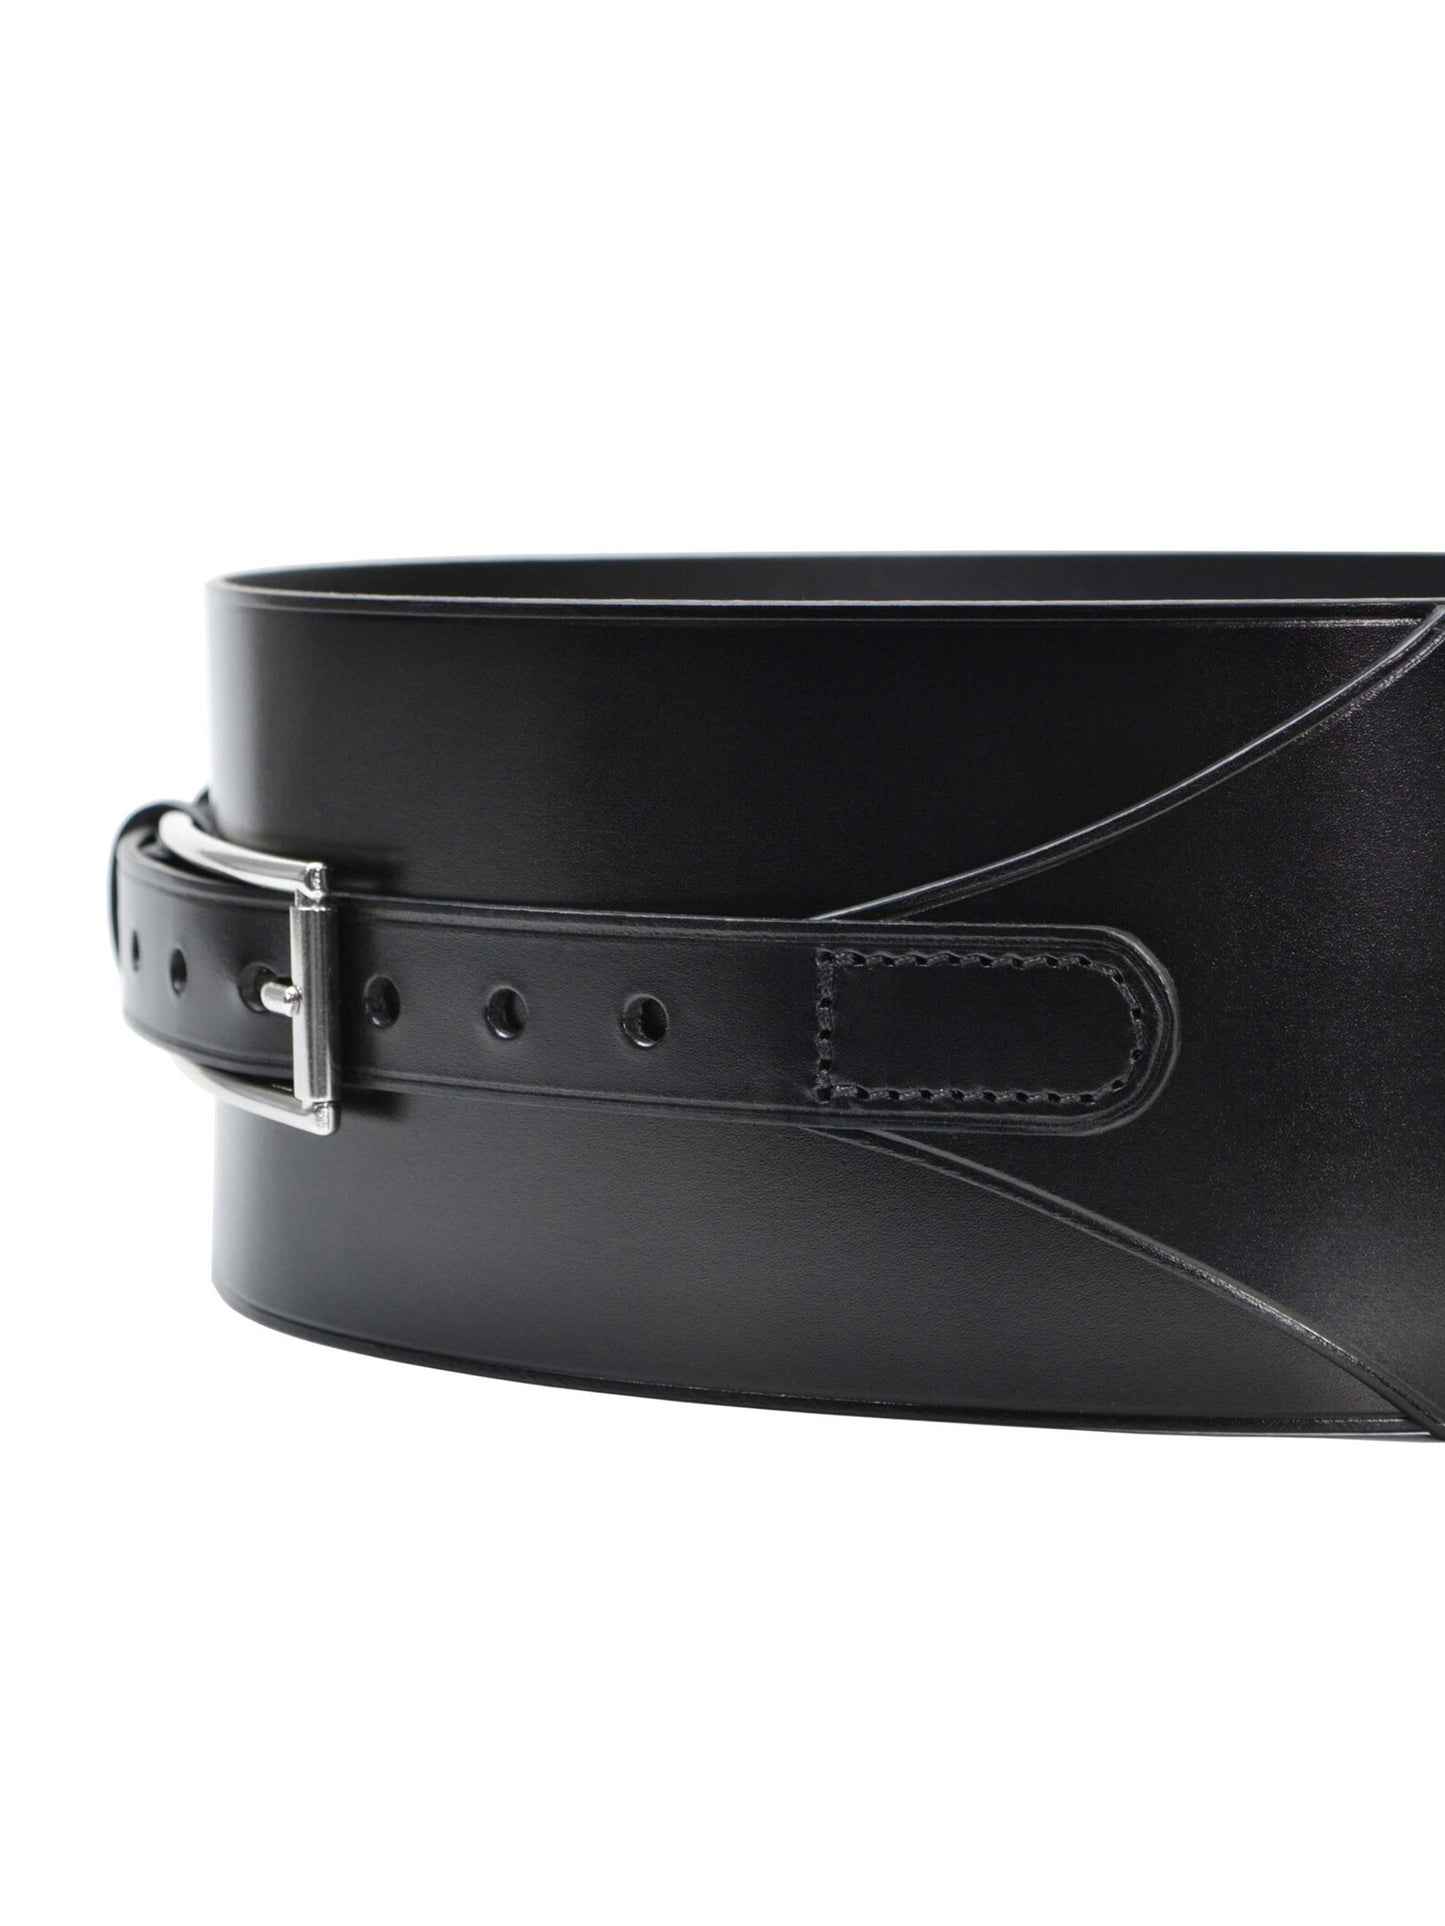 Detailed view of black leather belt.